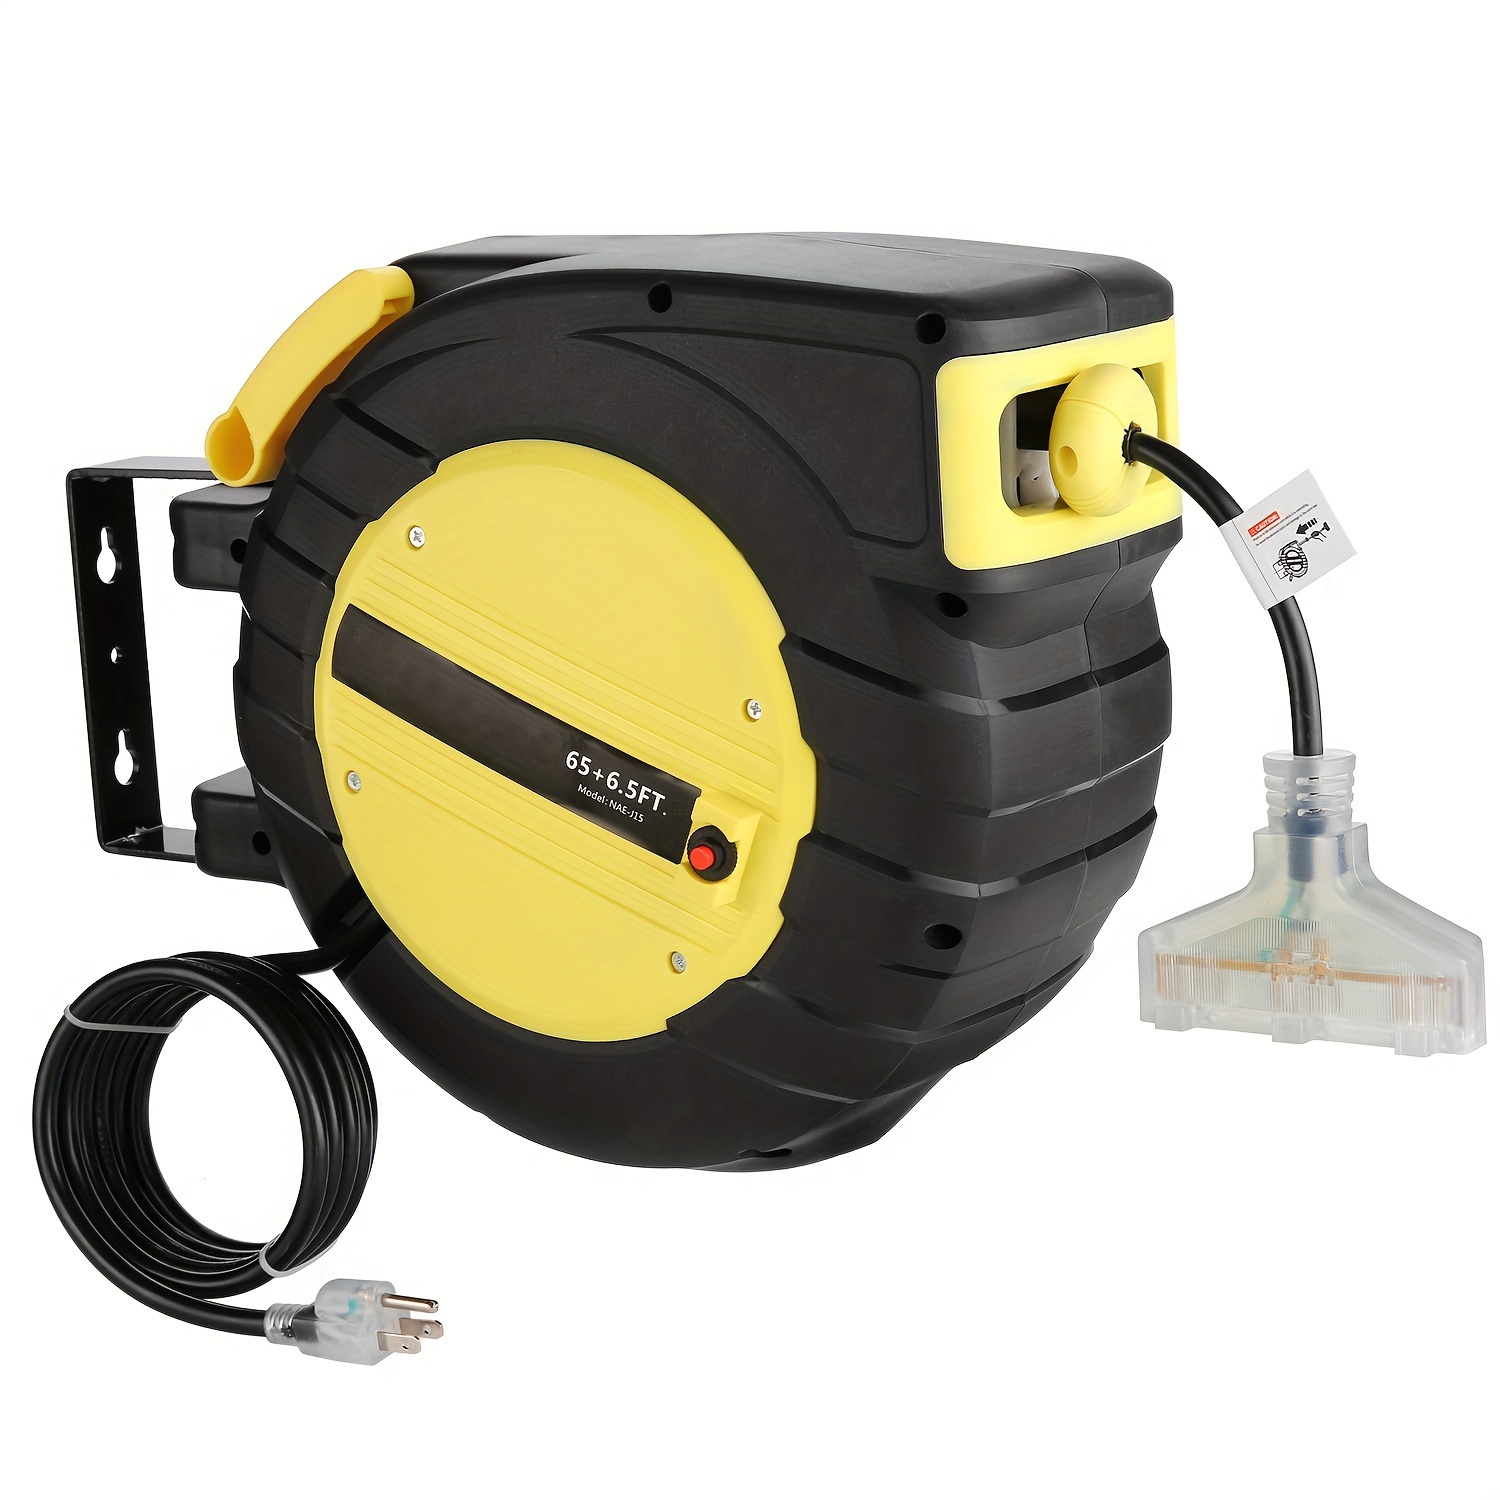 

Retractable Extension Cord Reel, Wall/ceiling Mounted Extension Cord Reel For Garage Workshop